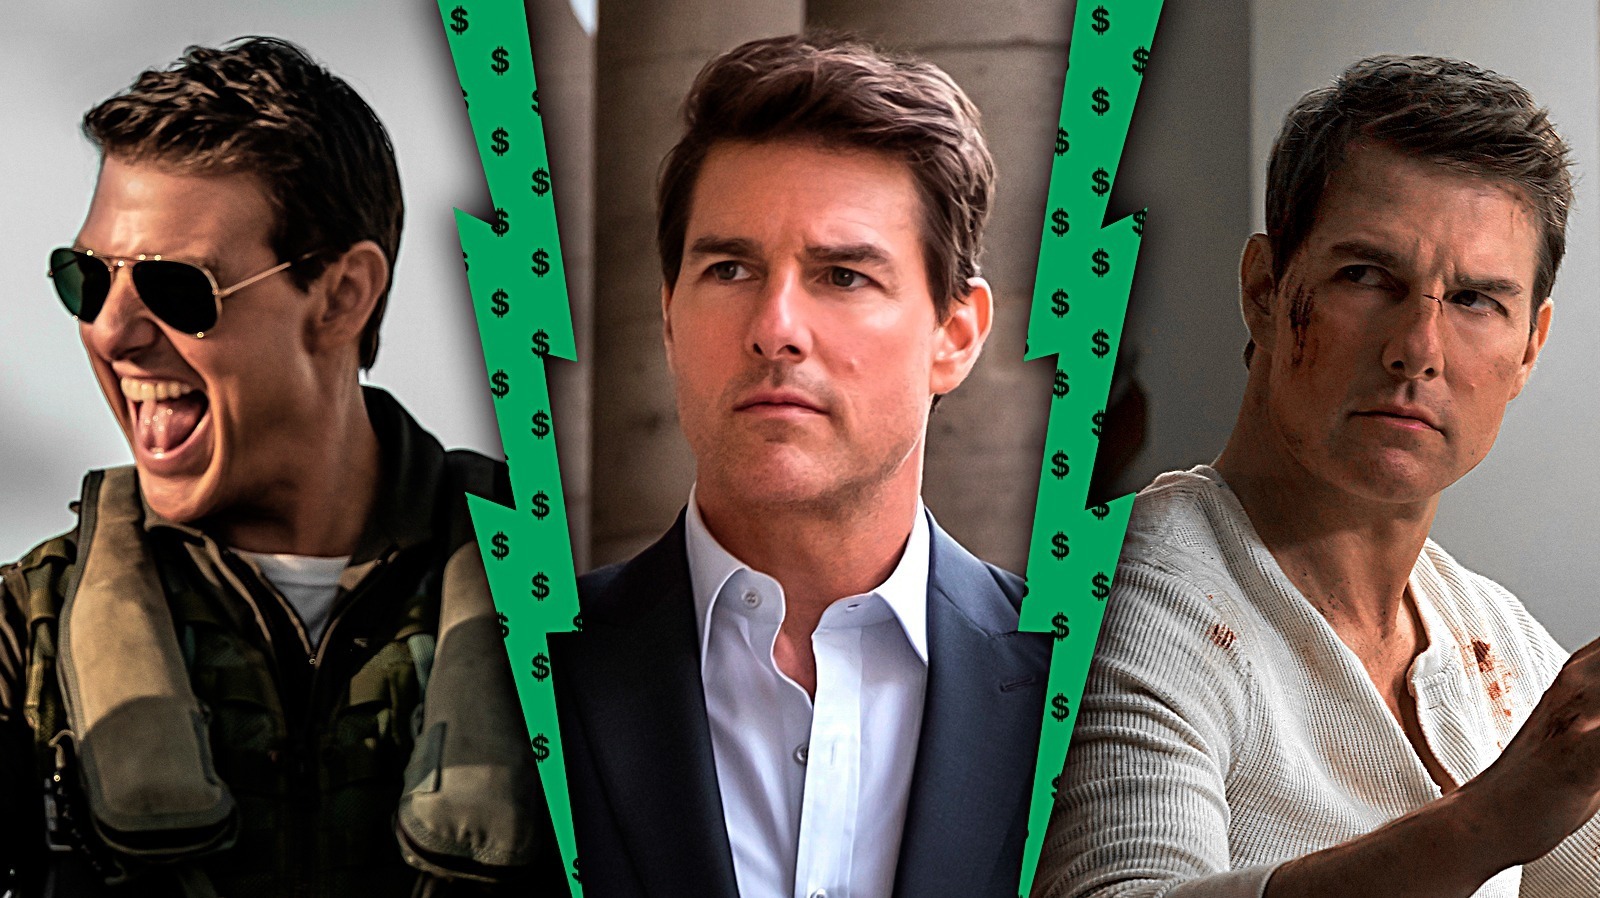 Tom Cruise Signs Massive Warner Bros. Film Deal - Here's What It Means